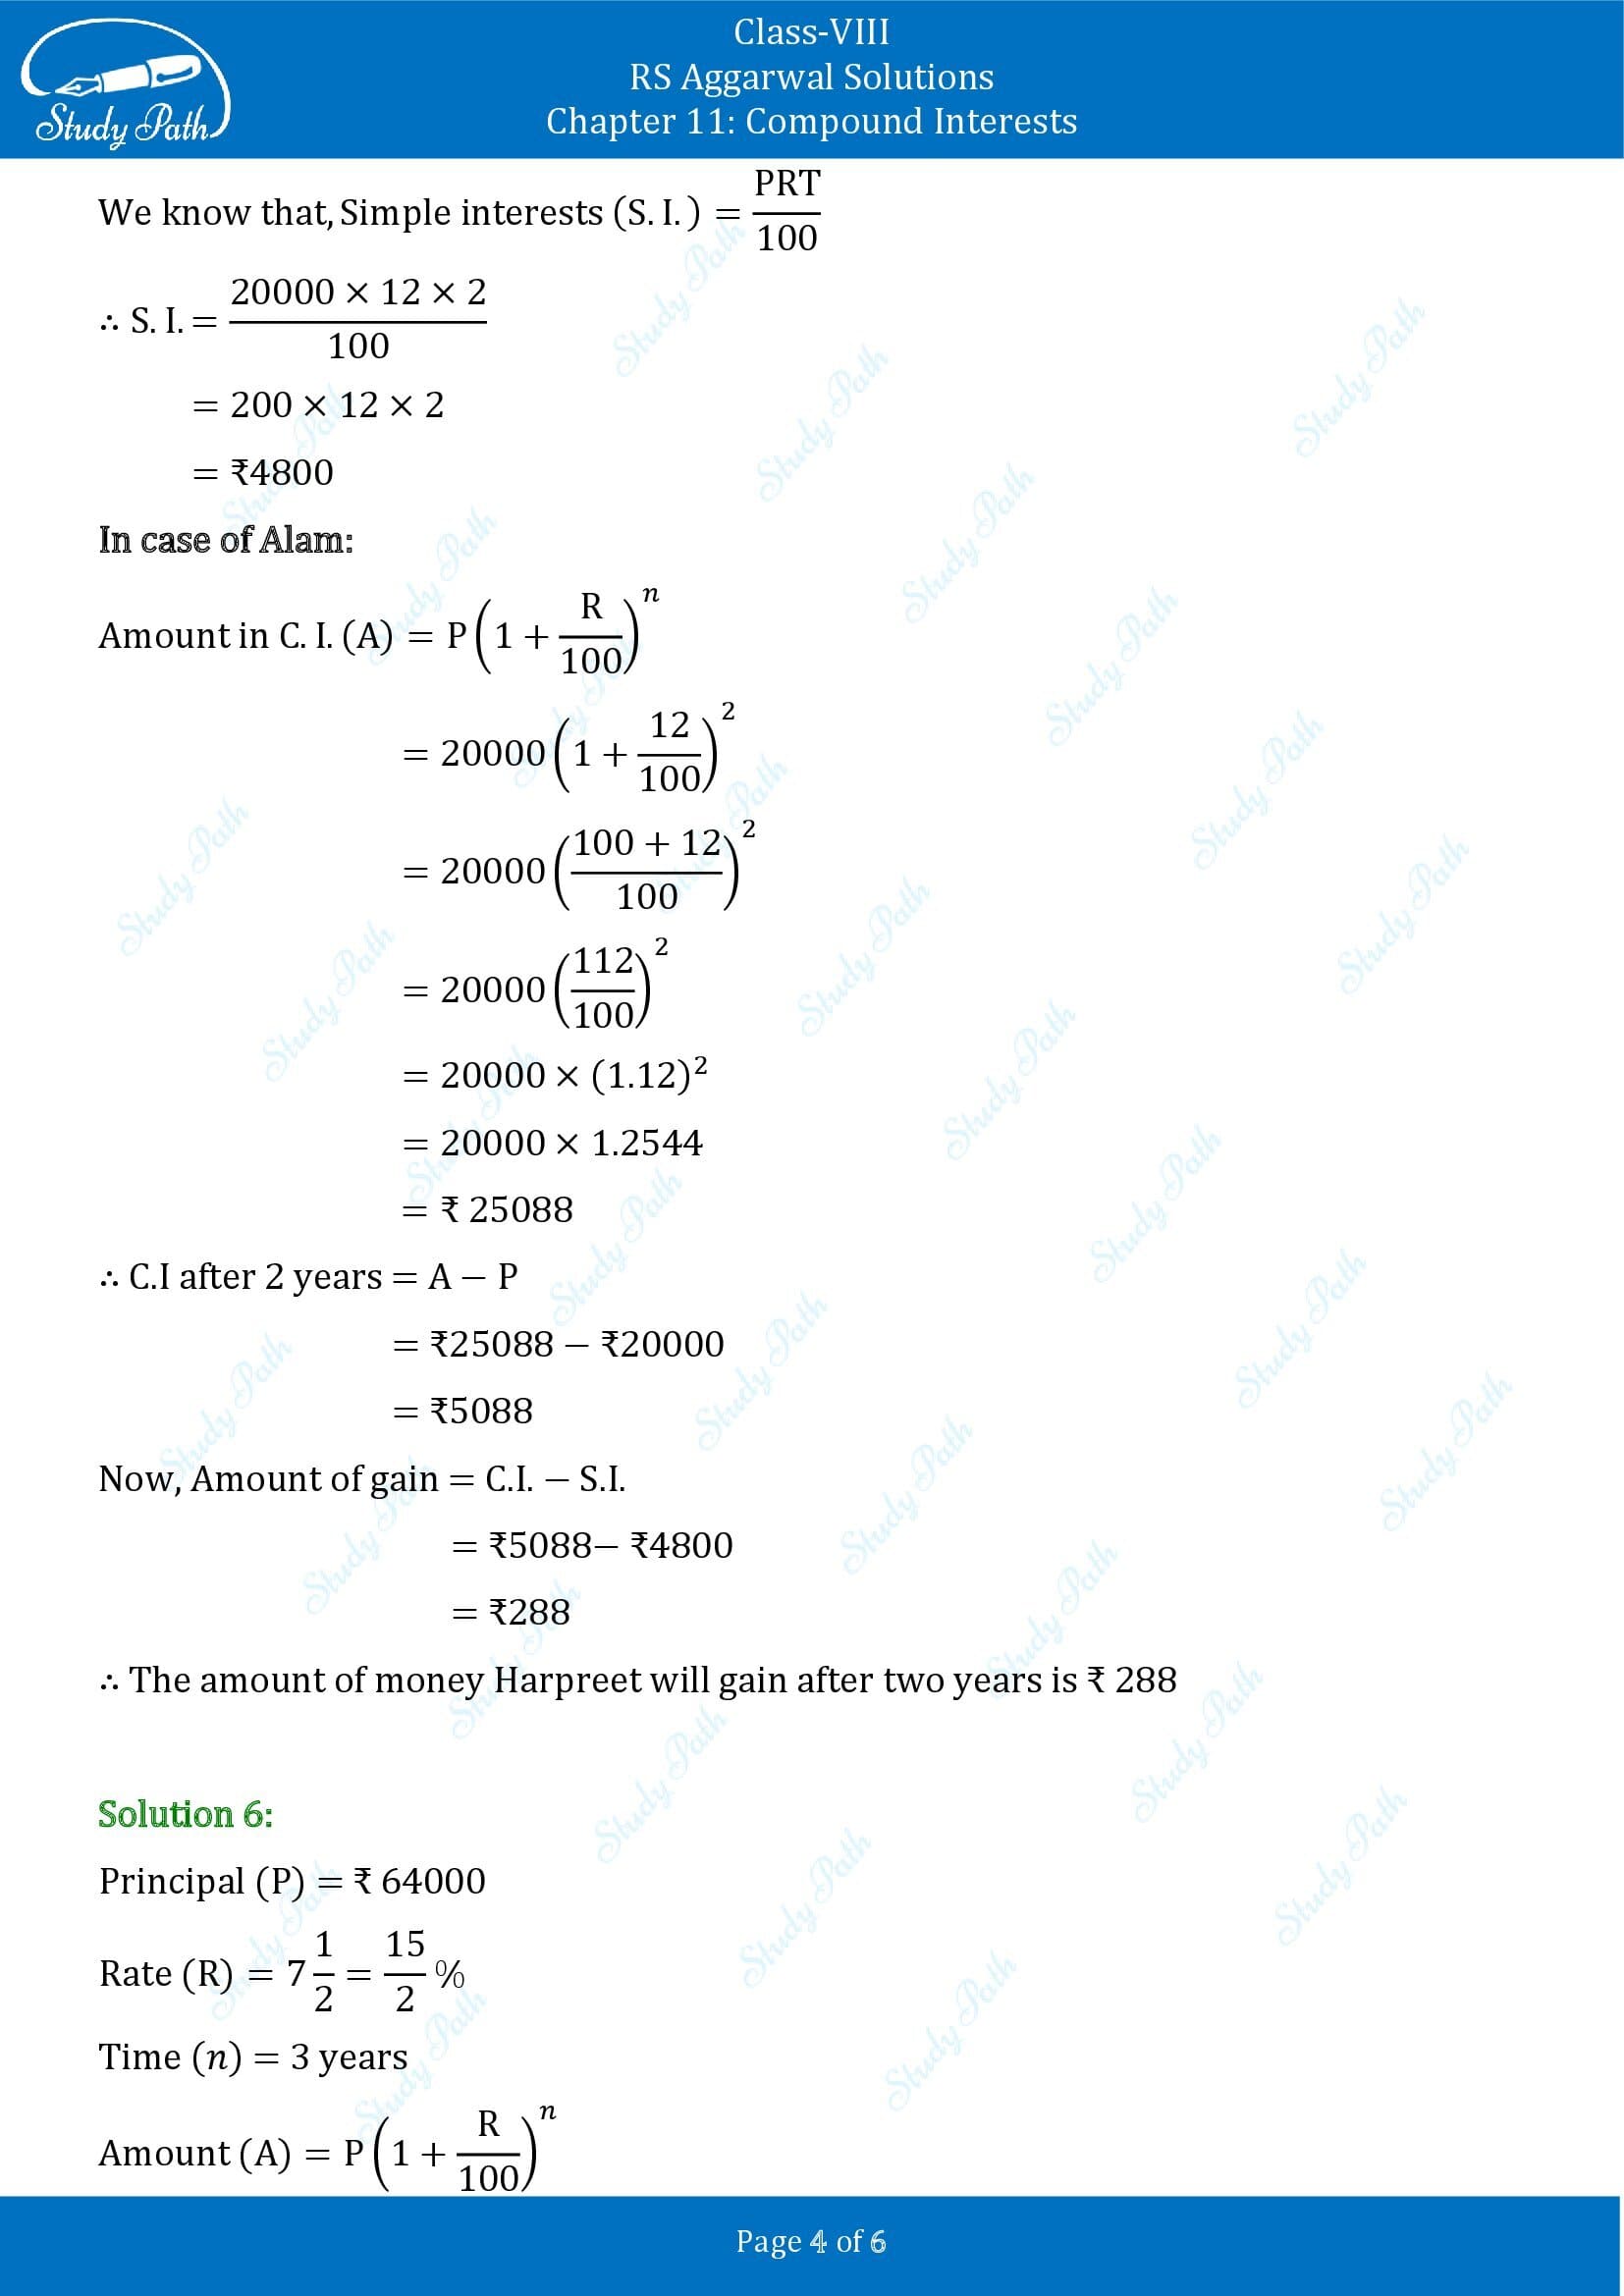 RS Aggarwal Solutions Class 8 Chapter 11 Compound Interests Exercise 11A 00004